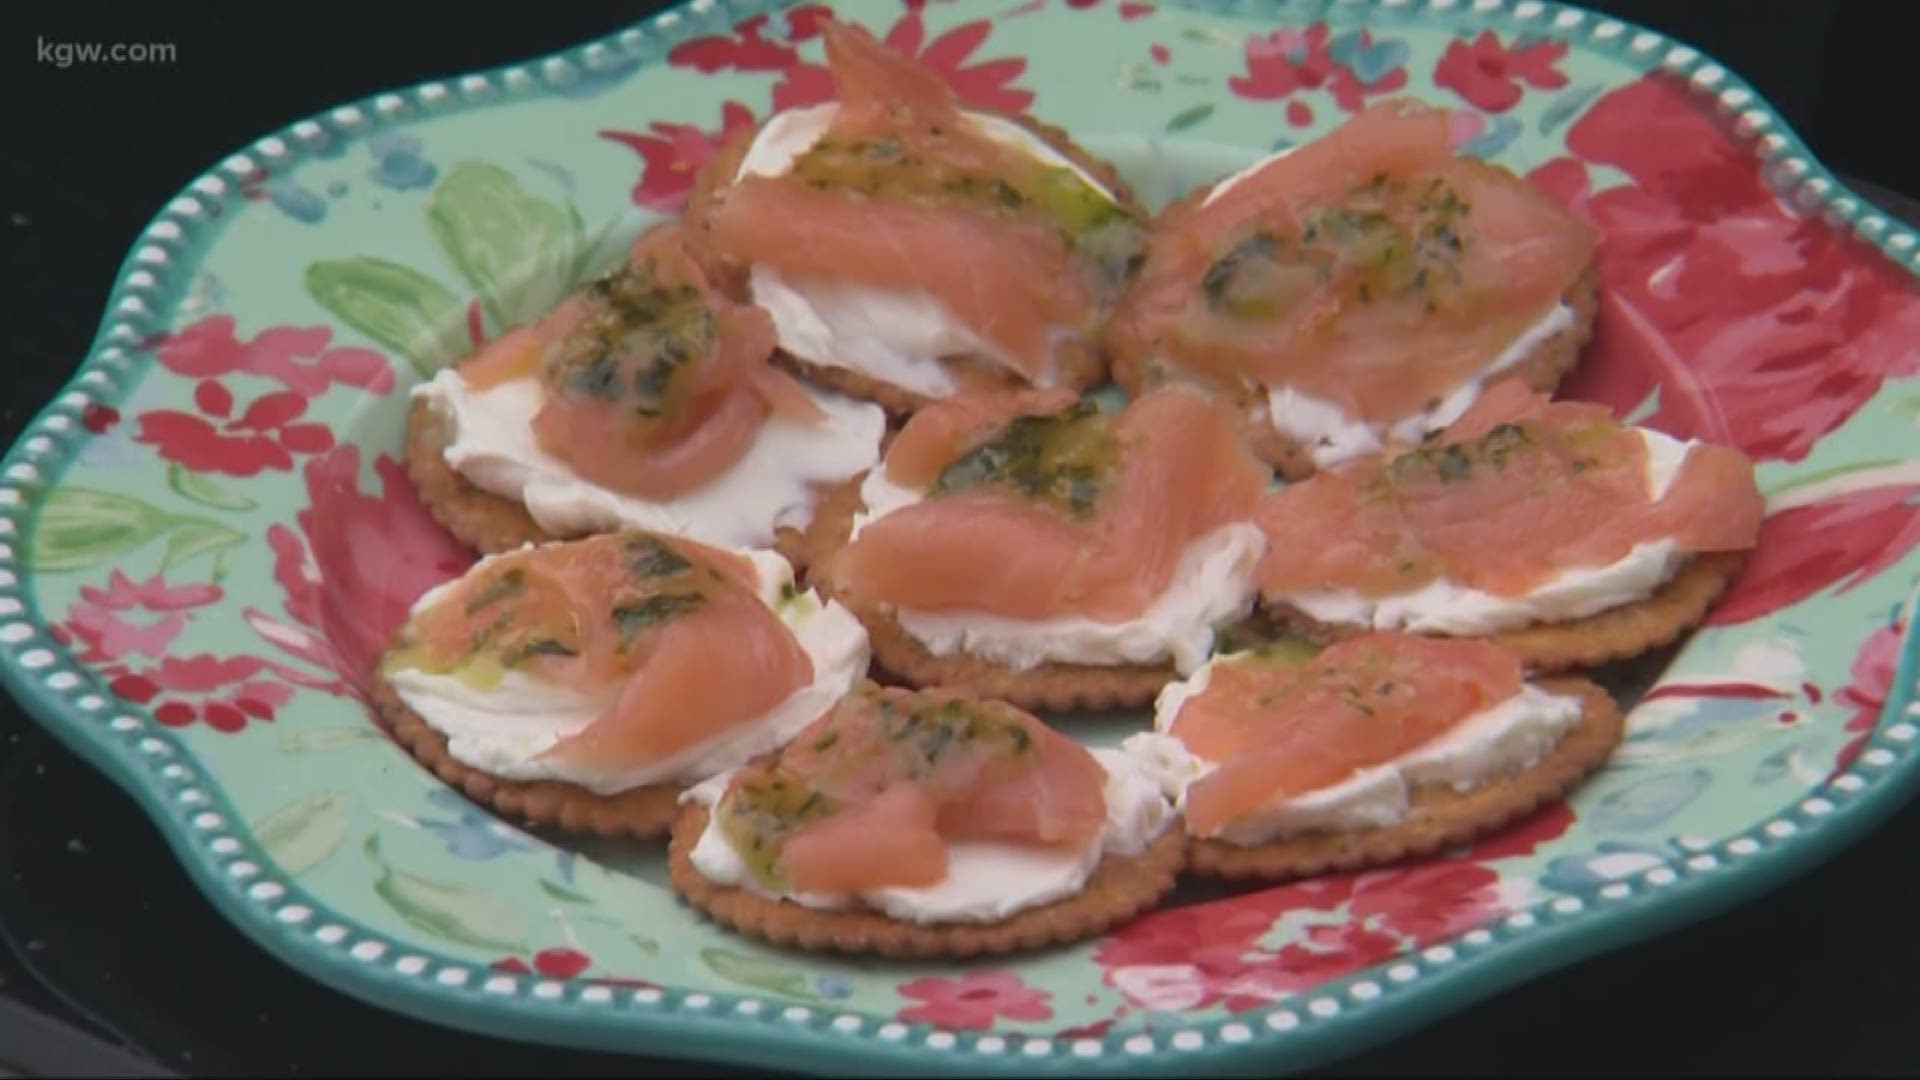 This week's summer recipe is courtesy of Kim and Andrew, who live in Lafayette. Kim shows us how to make her salmon appetizer and incredibly simple potato salad.